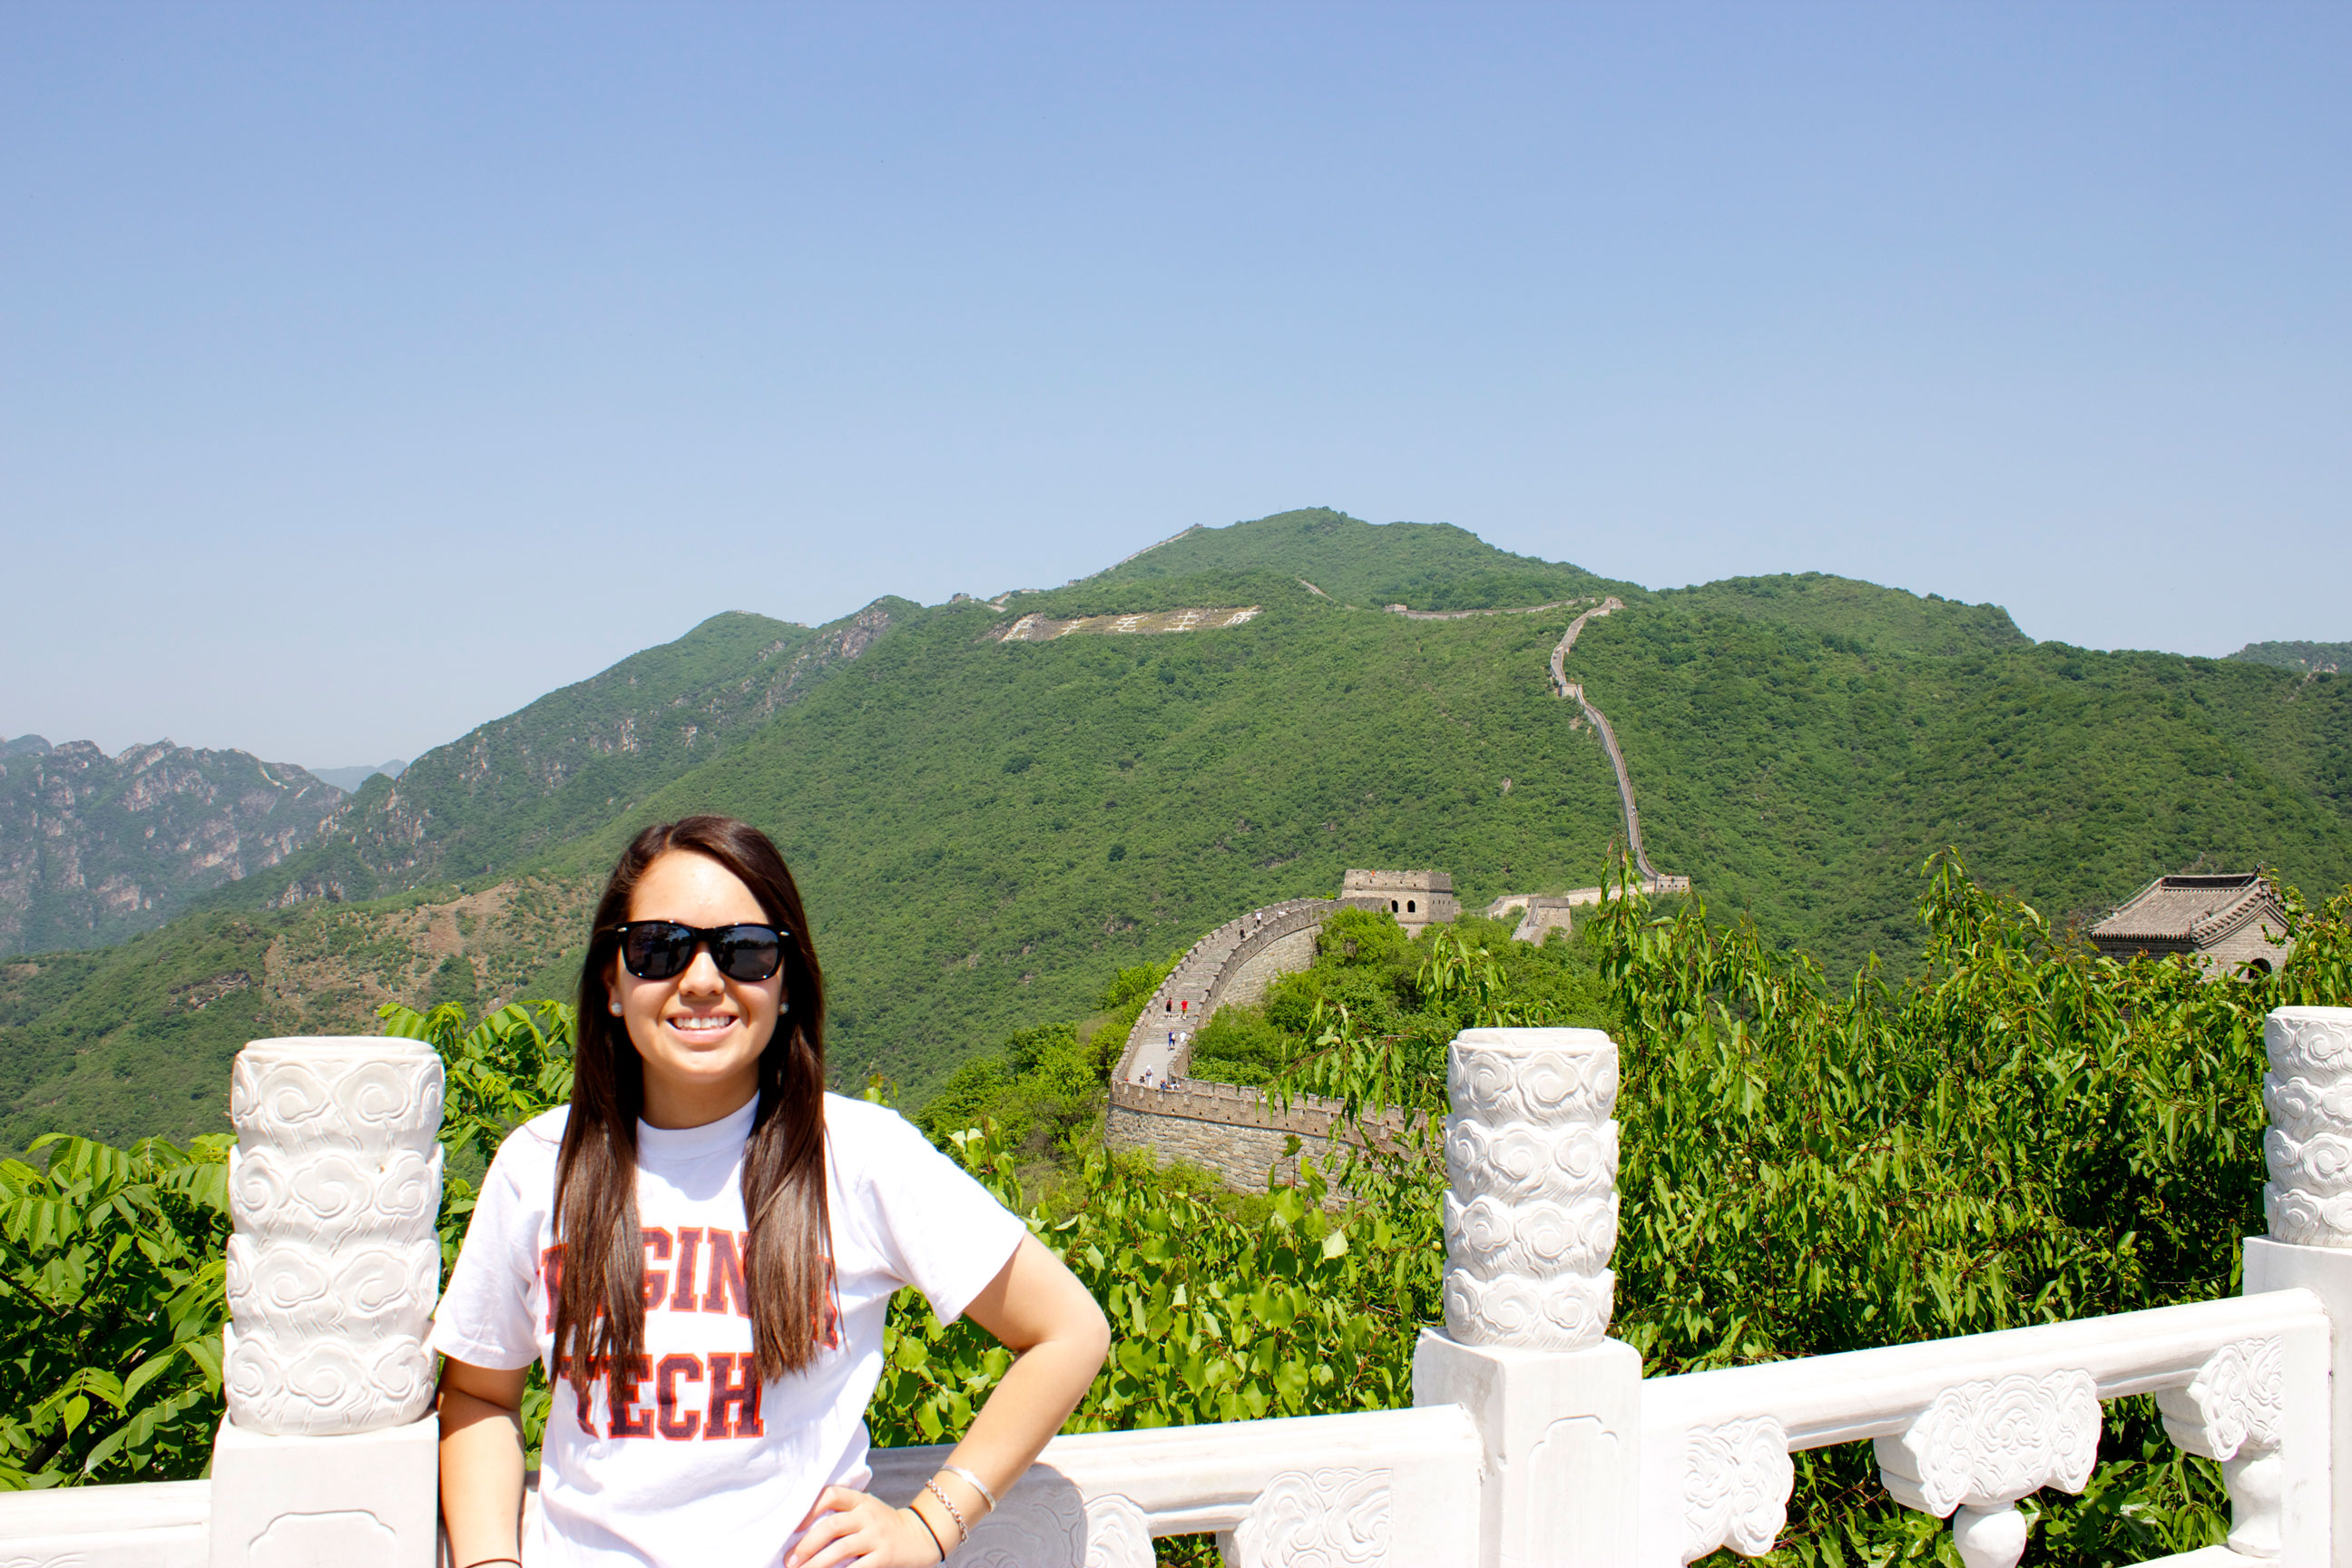 Kelsey visits the Great Wall of China.